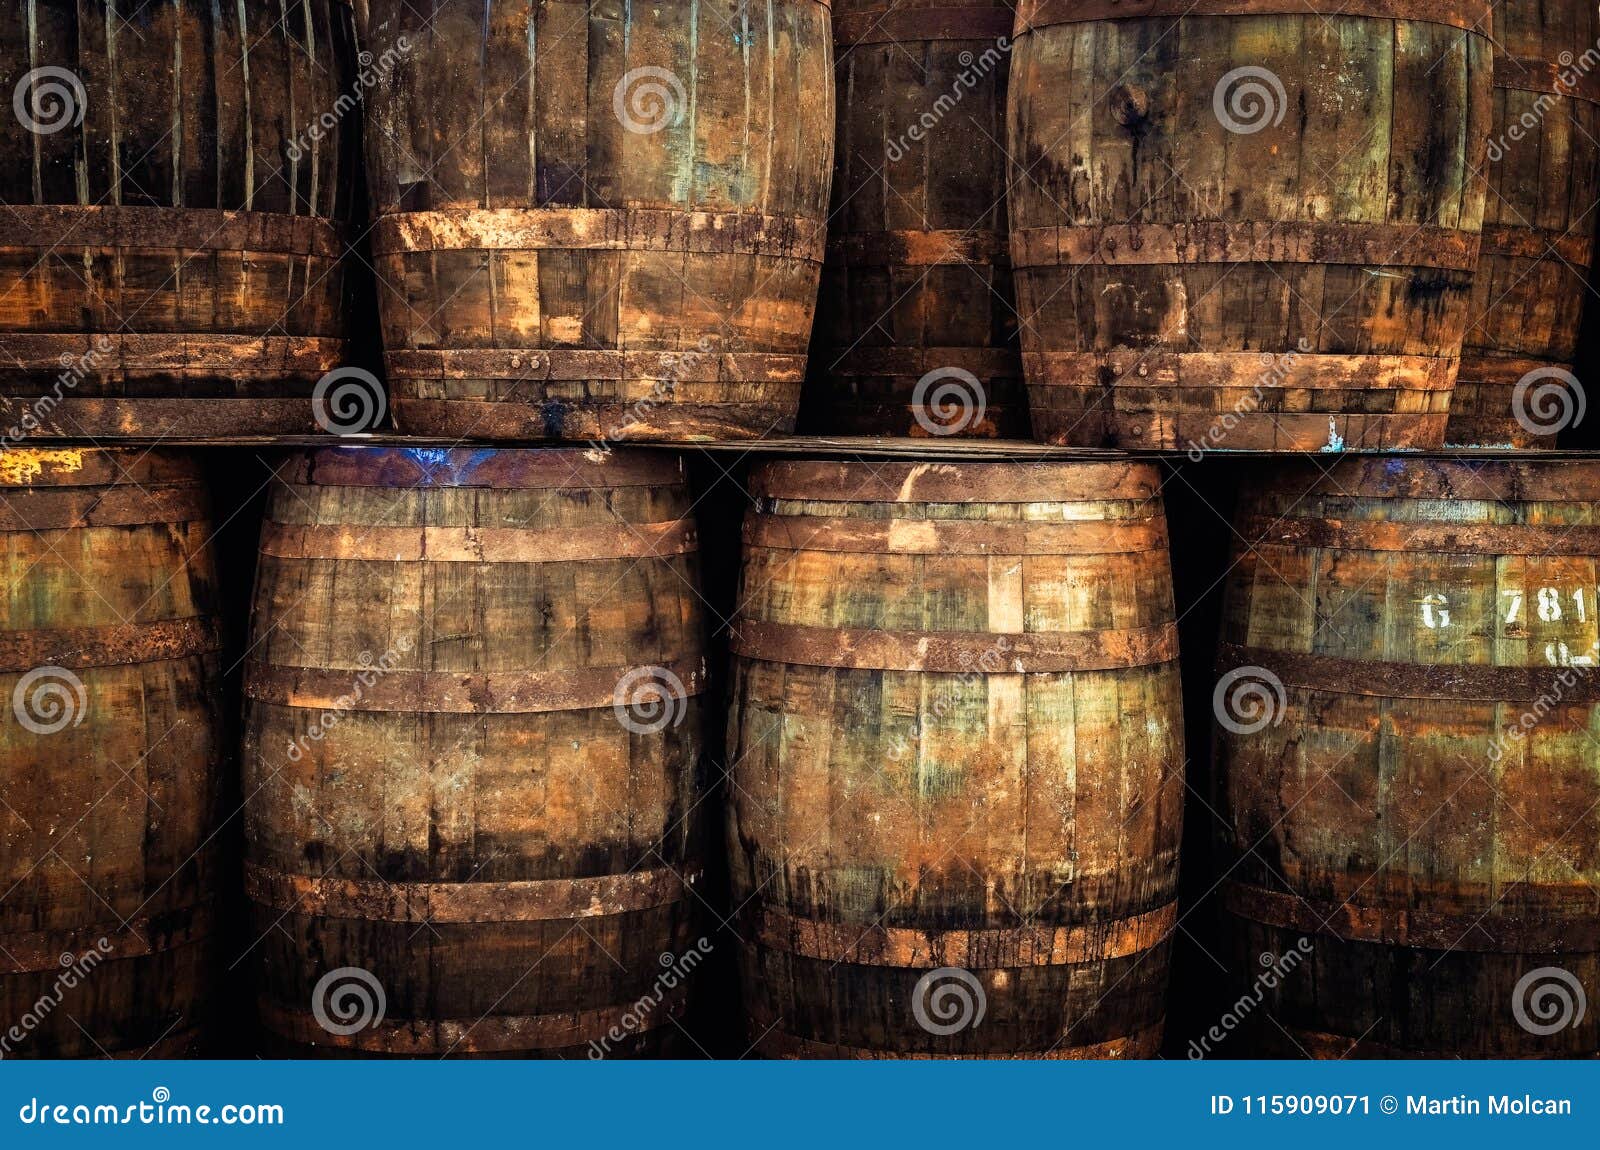 detail of stacked old wooden whisky barrels